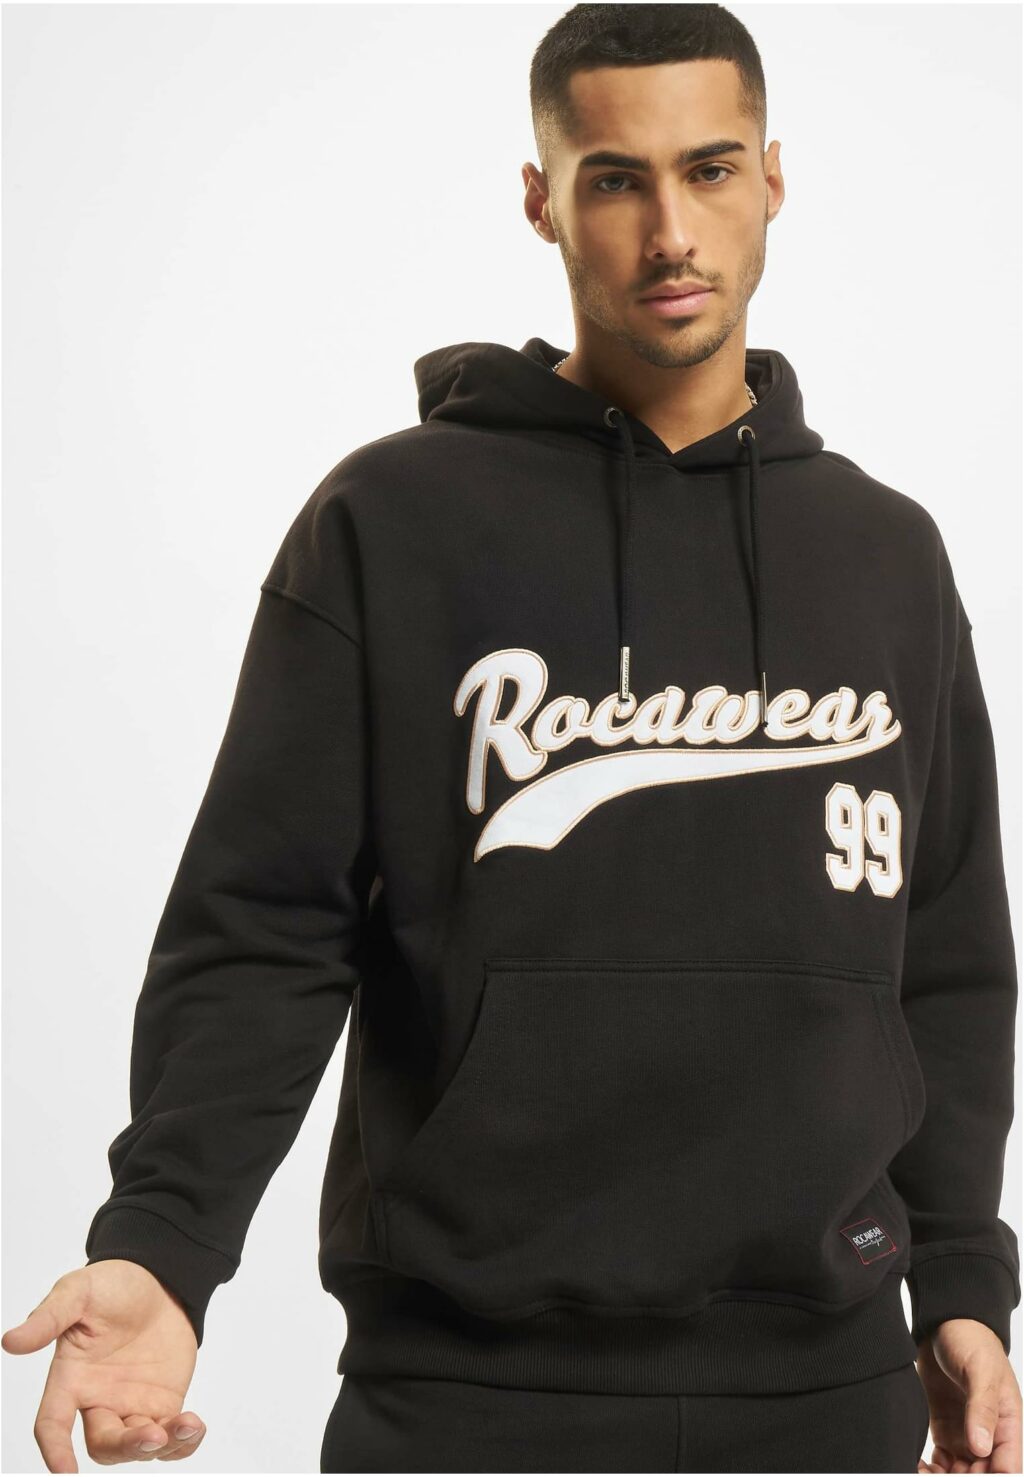 Rocawear Perfect Blend Hoody black RWHD061